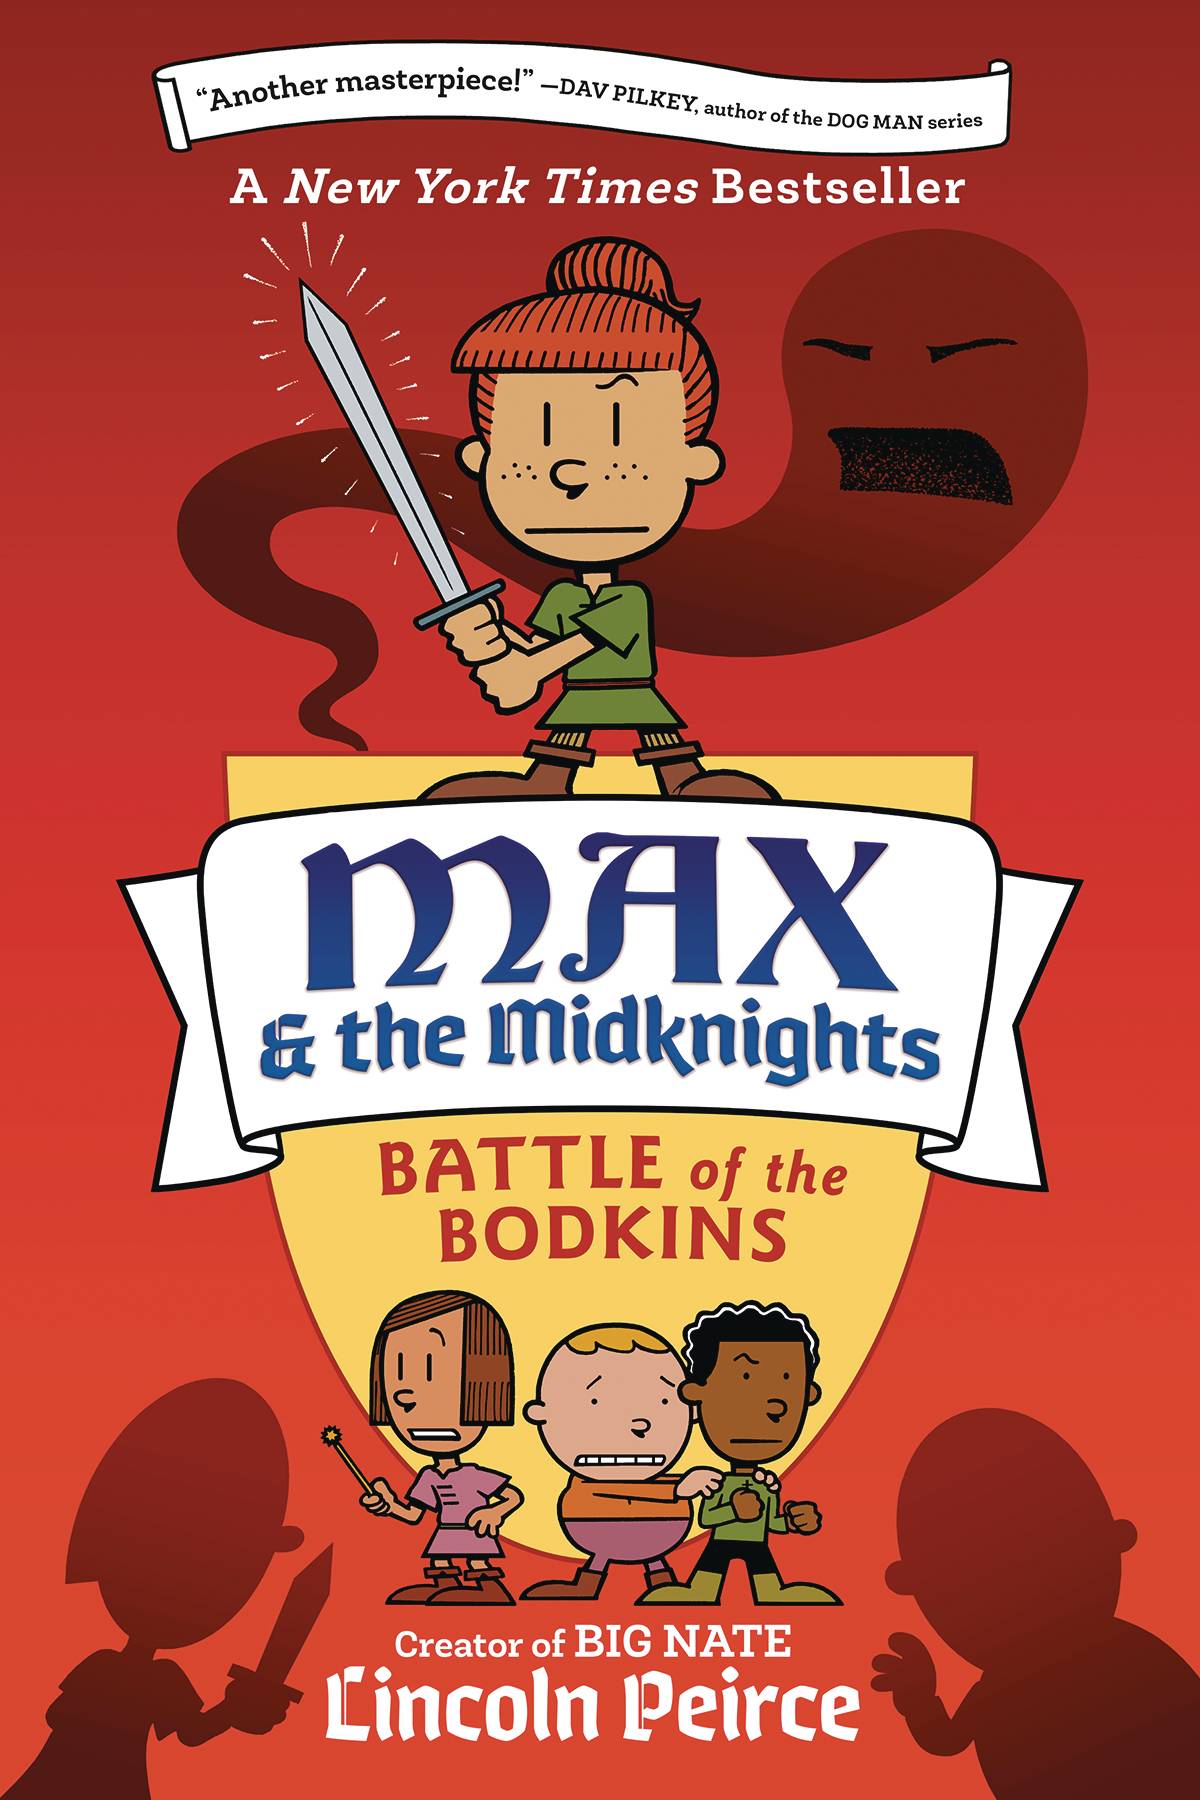 MAX & MIDKNIGHTS GN BATTLE OF BODKINS